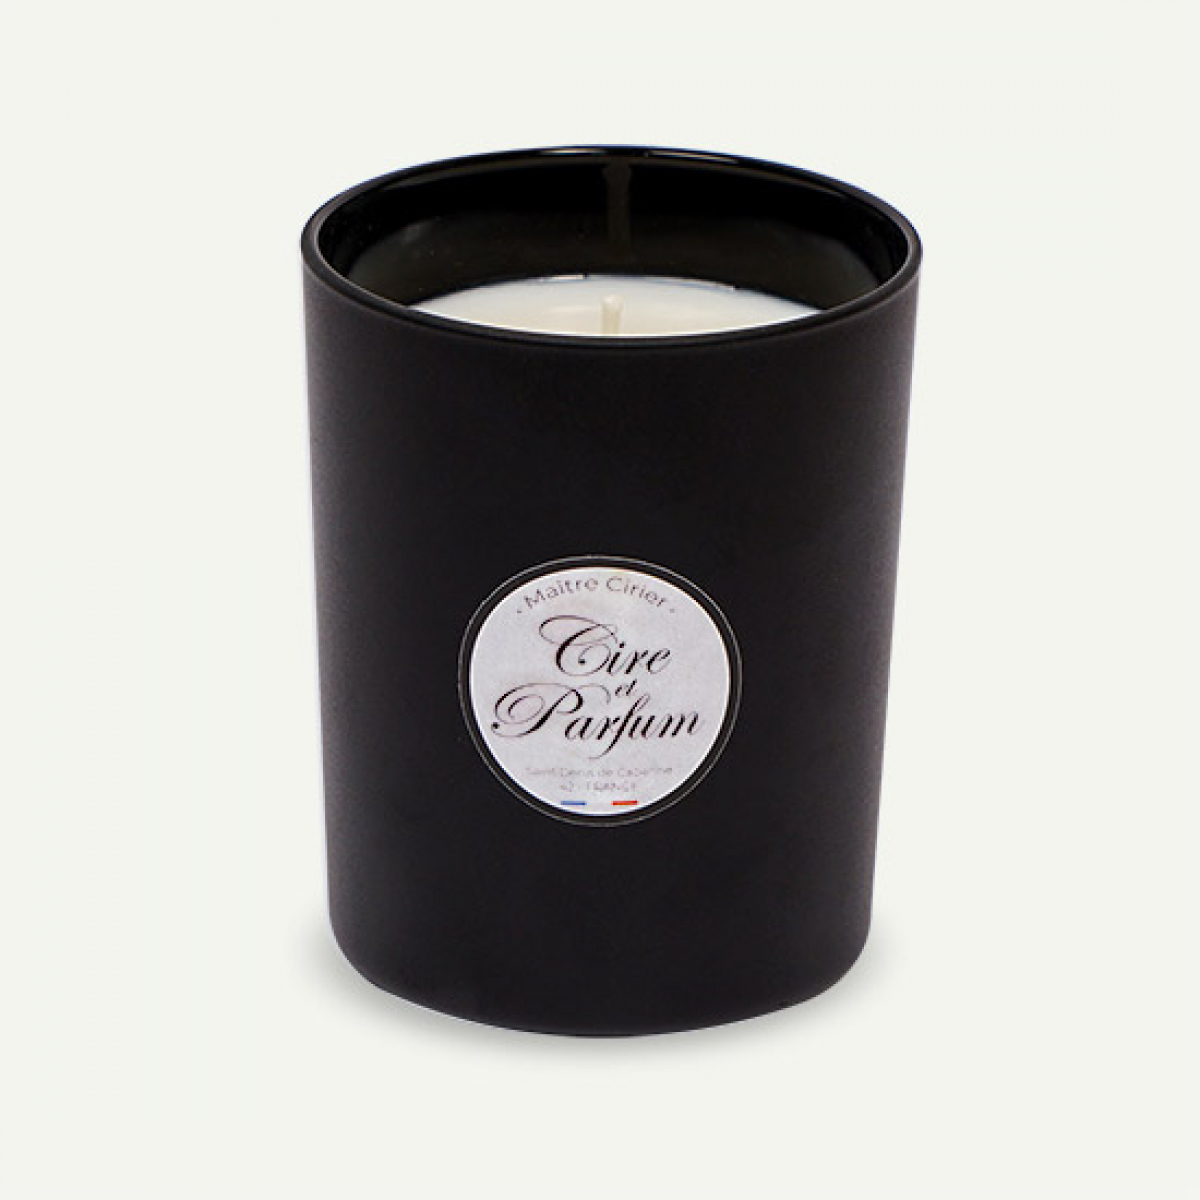 The Gourmet  scented candle